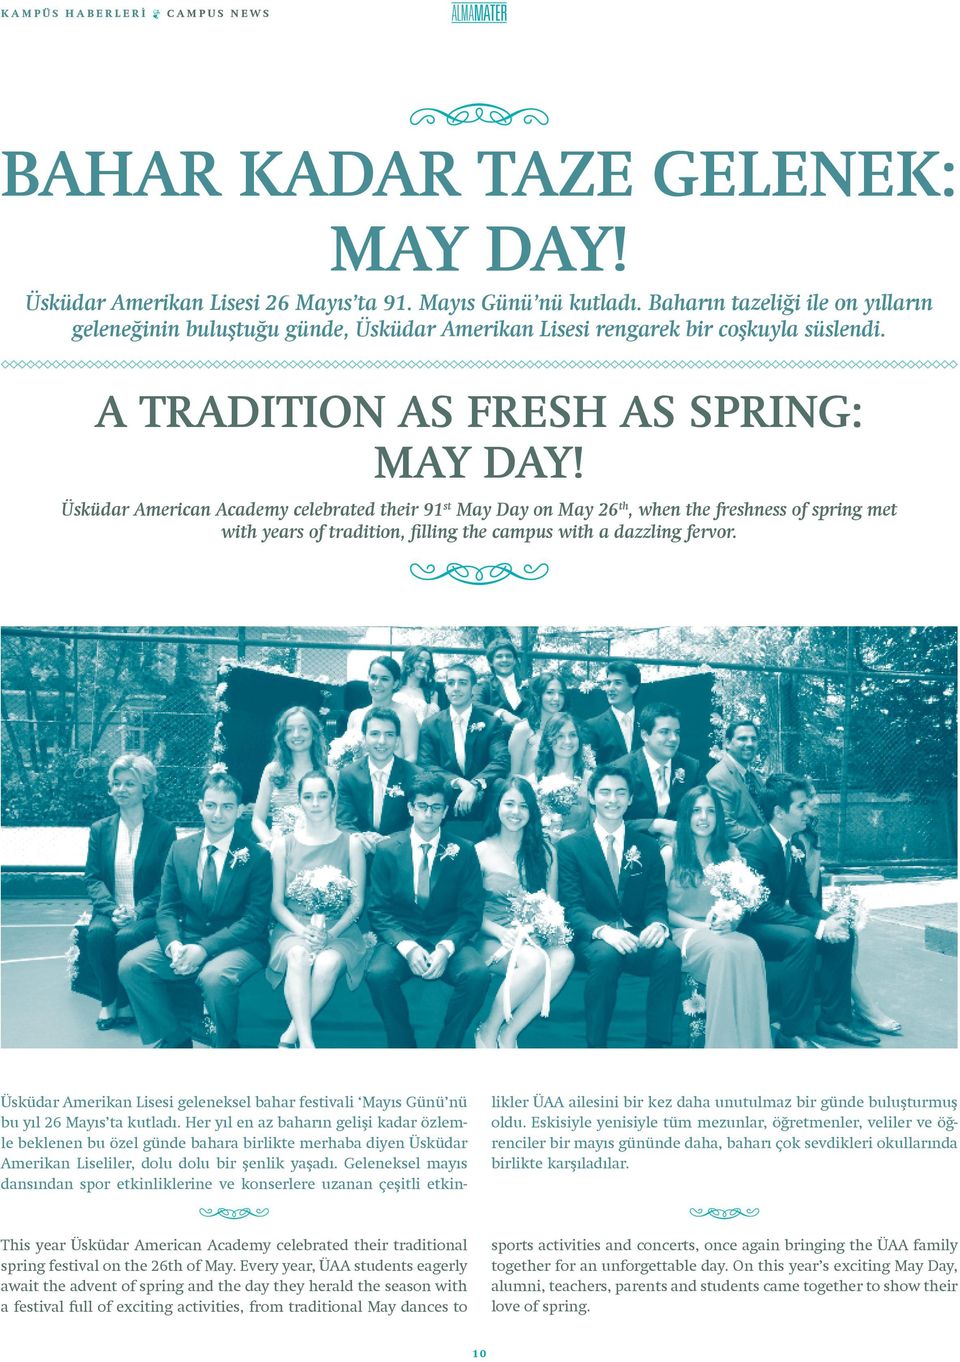 Üsküdar American Academy celebrated their 91 st May Day on May 26 th, when the freshness of spring met with years of tradition, filling the campus with a dazzling fervor.